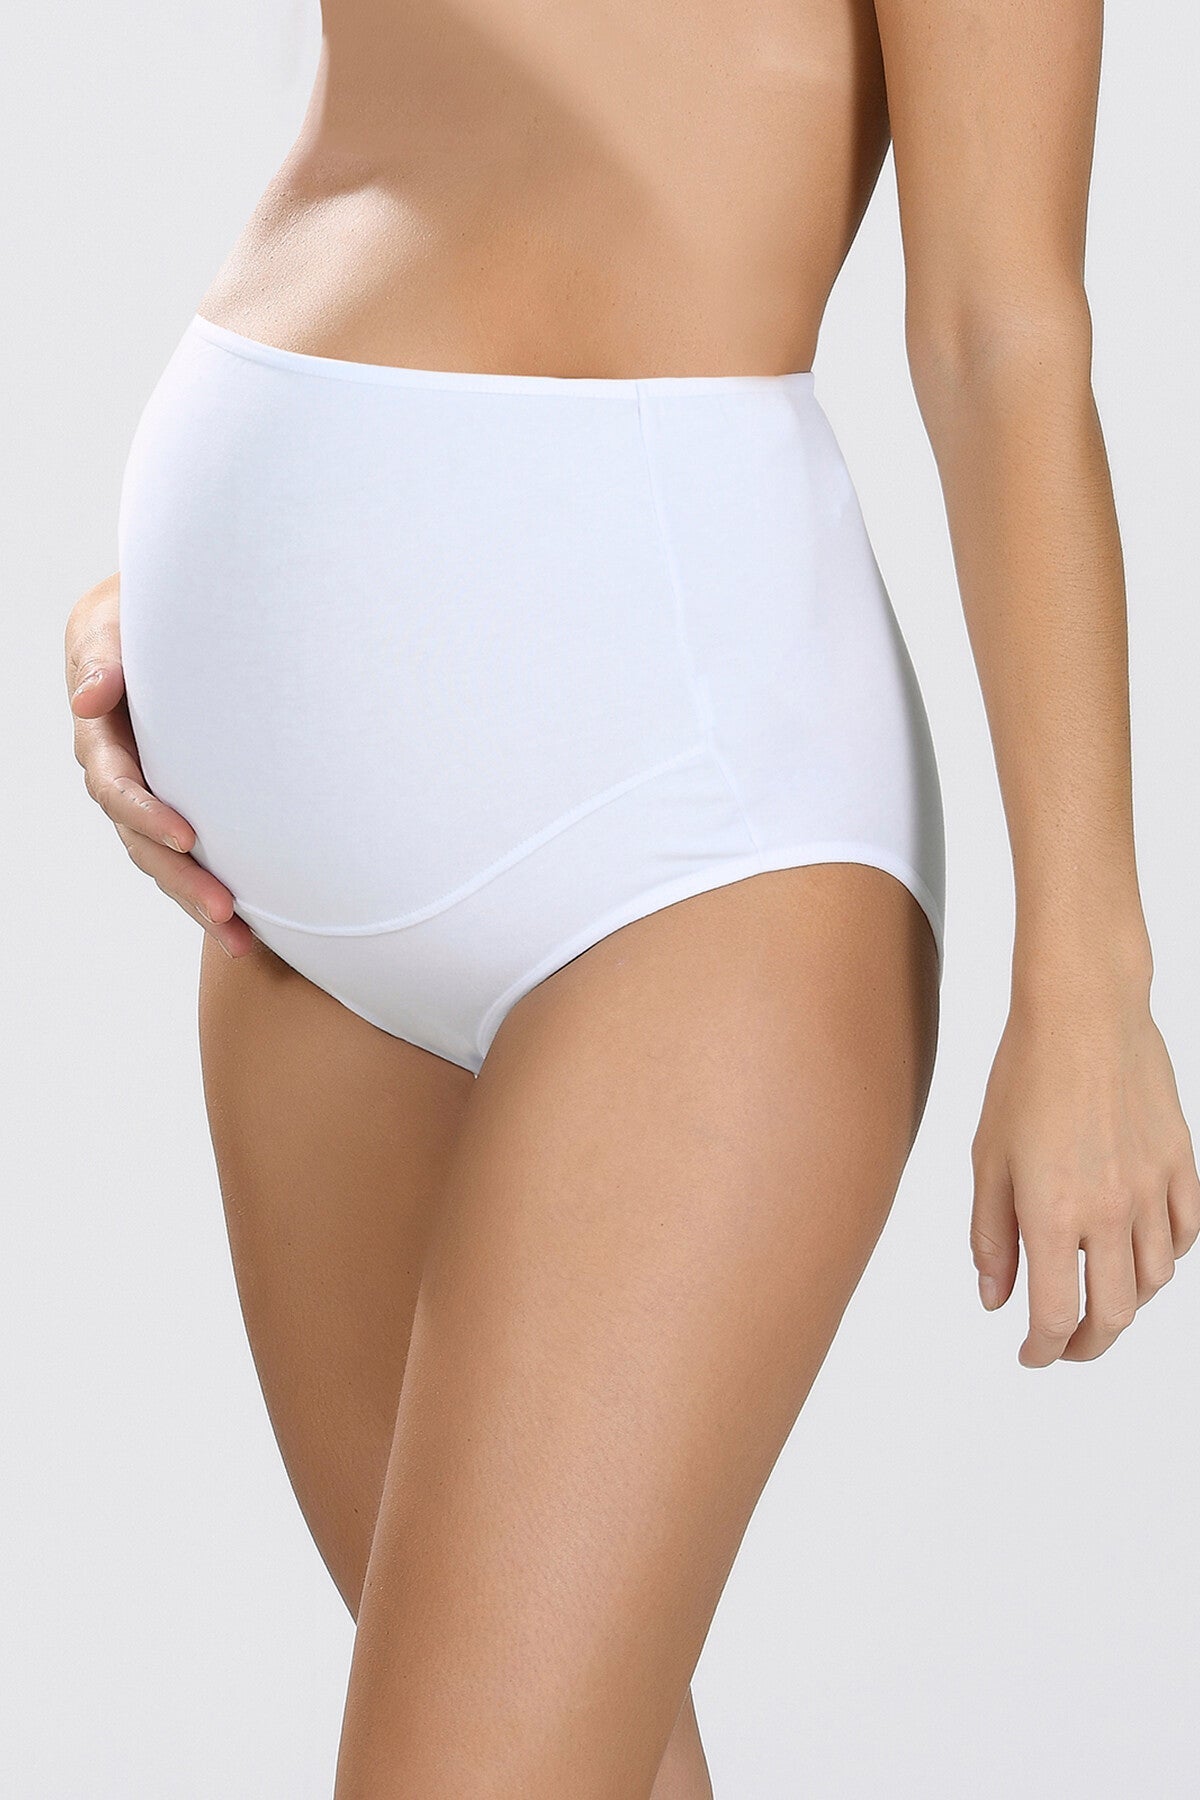 Shopymommy 540 Cotton Maternity Panties White